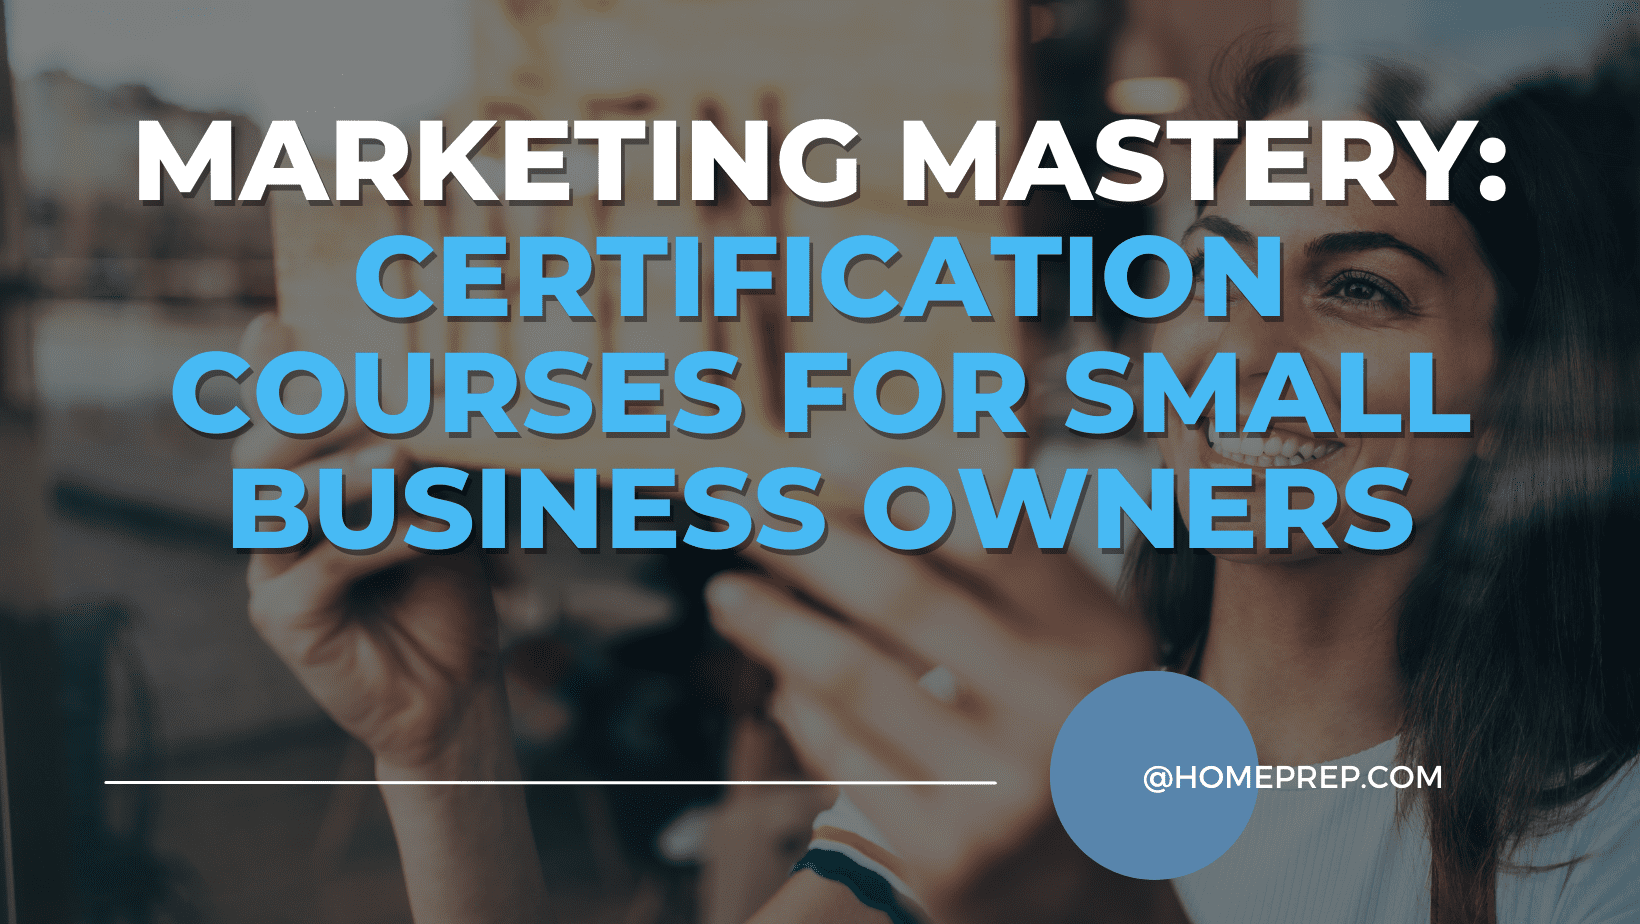 Marketing Mastery: Certification Courses for Small Business Owners